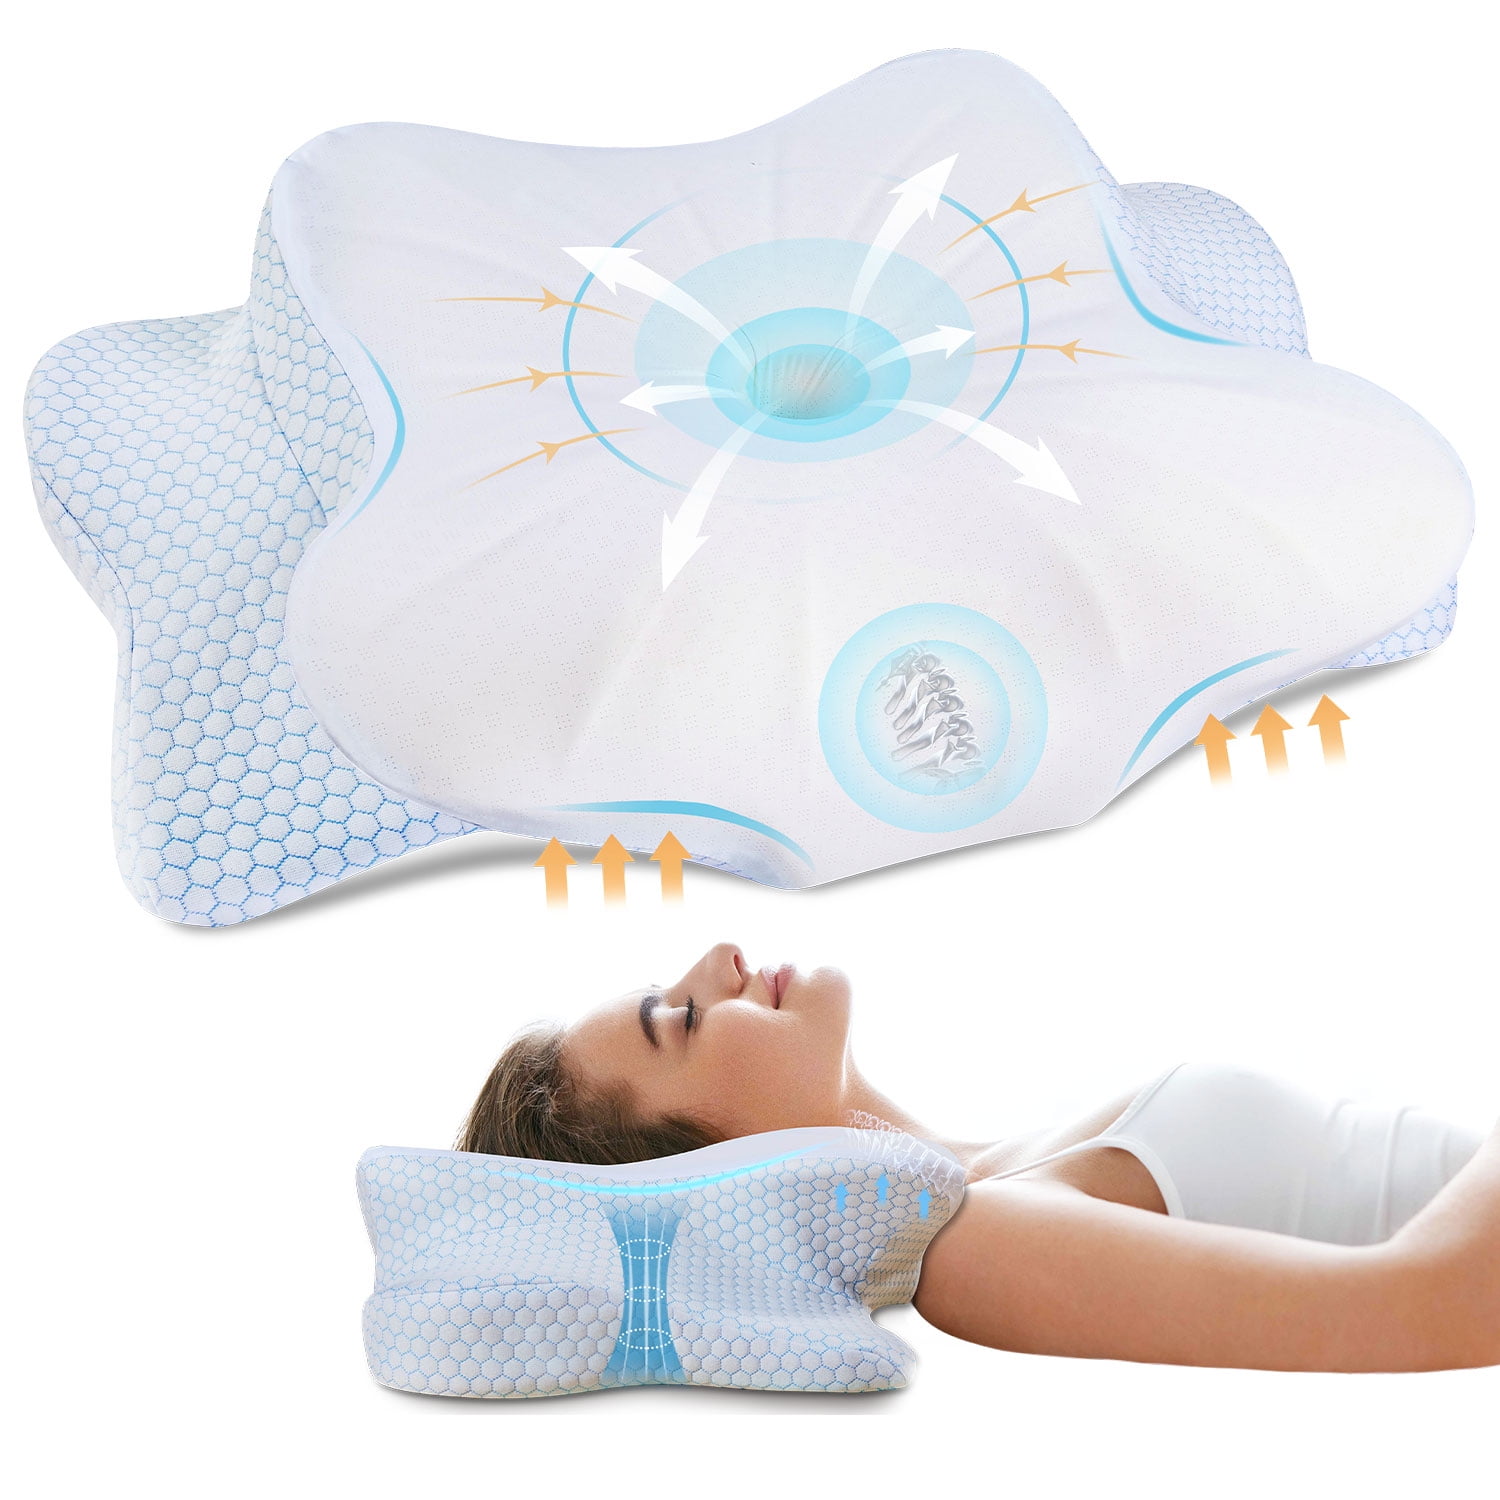 Detensor Cervical Spine Support Pillow - FREE Shipping